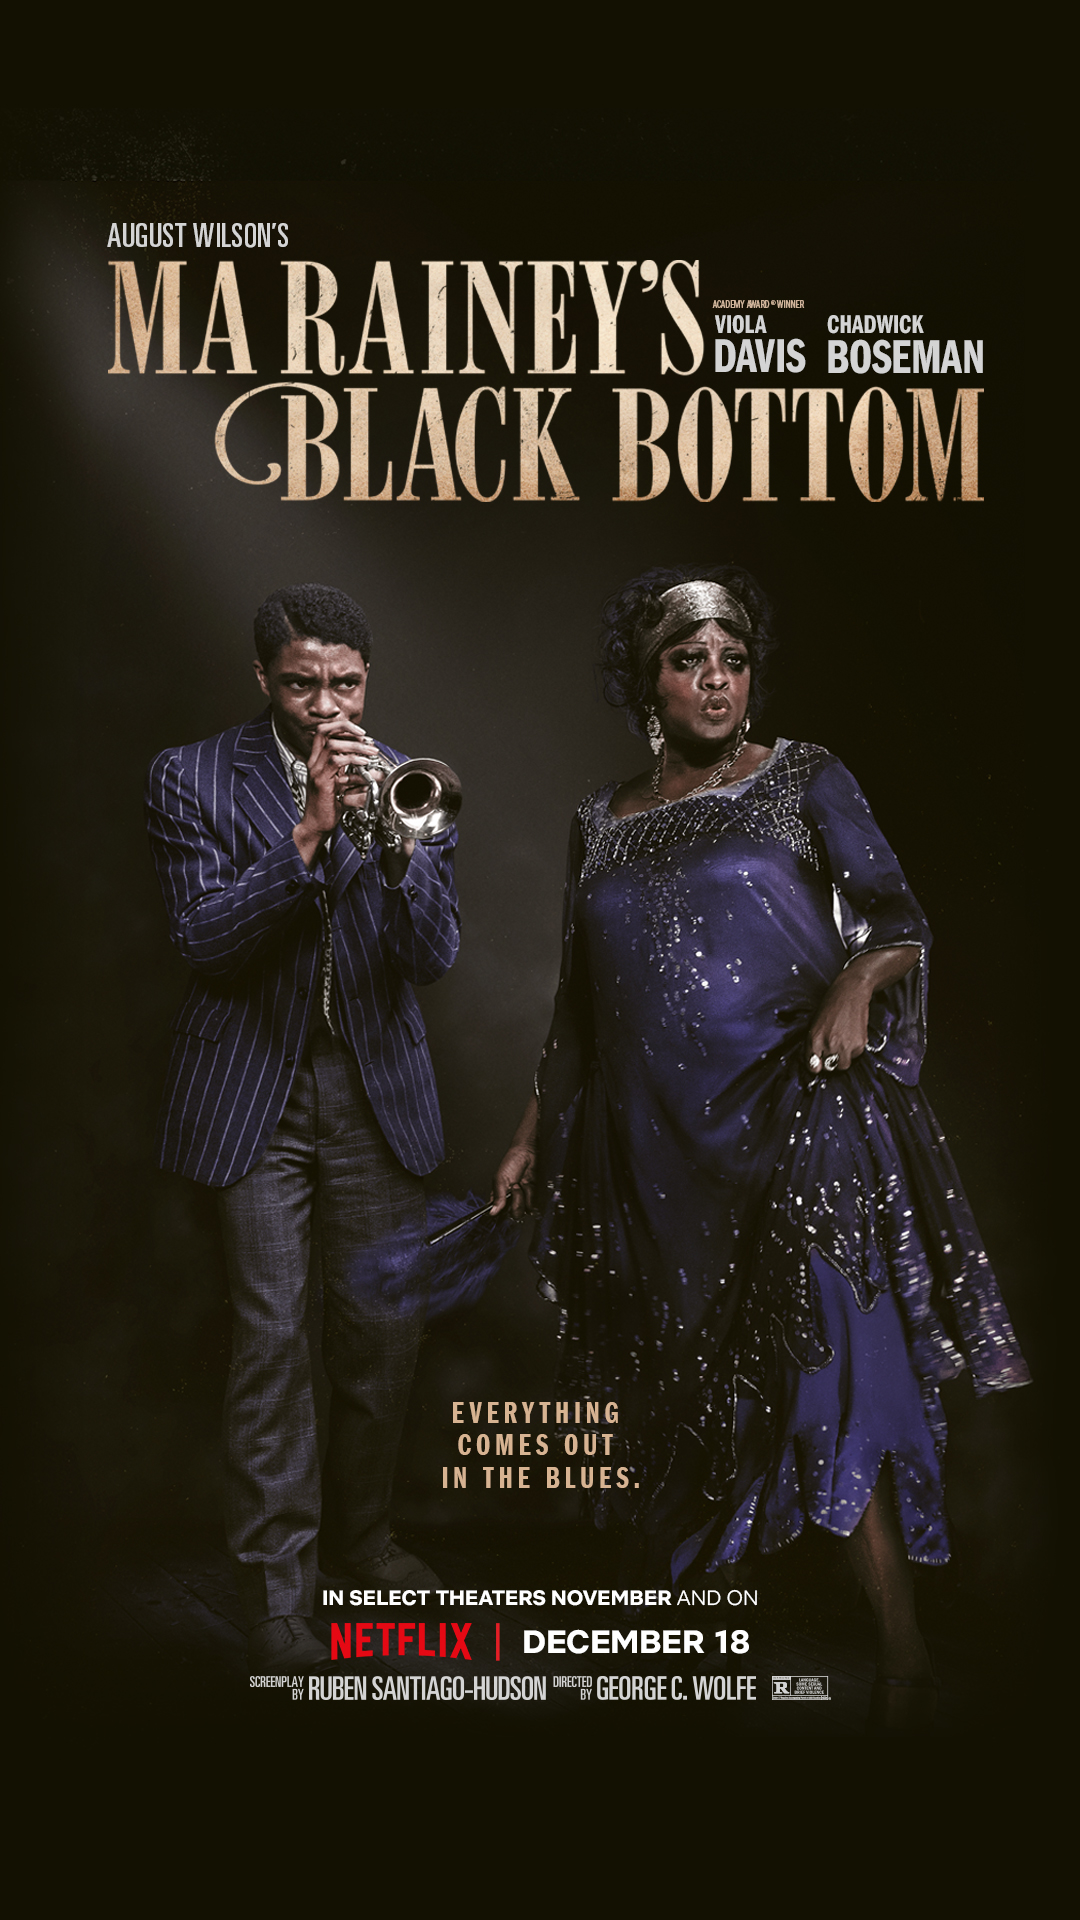 Five Things I Liked About The Film ‘Ma Rainey’s Black Bottom’